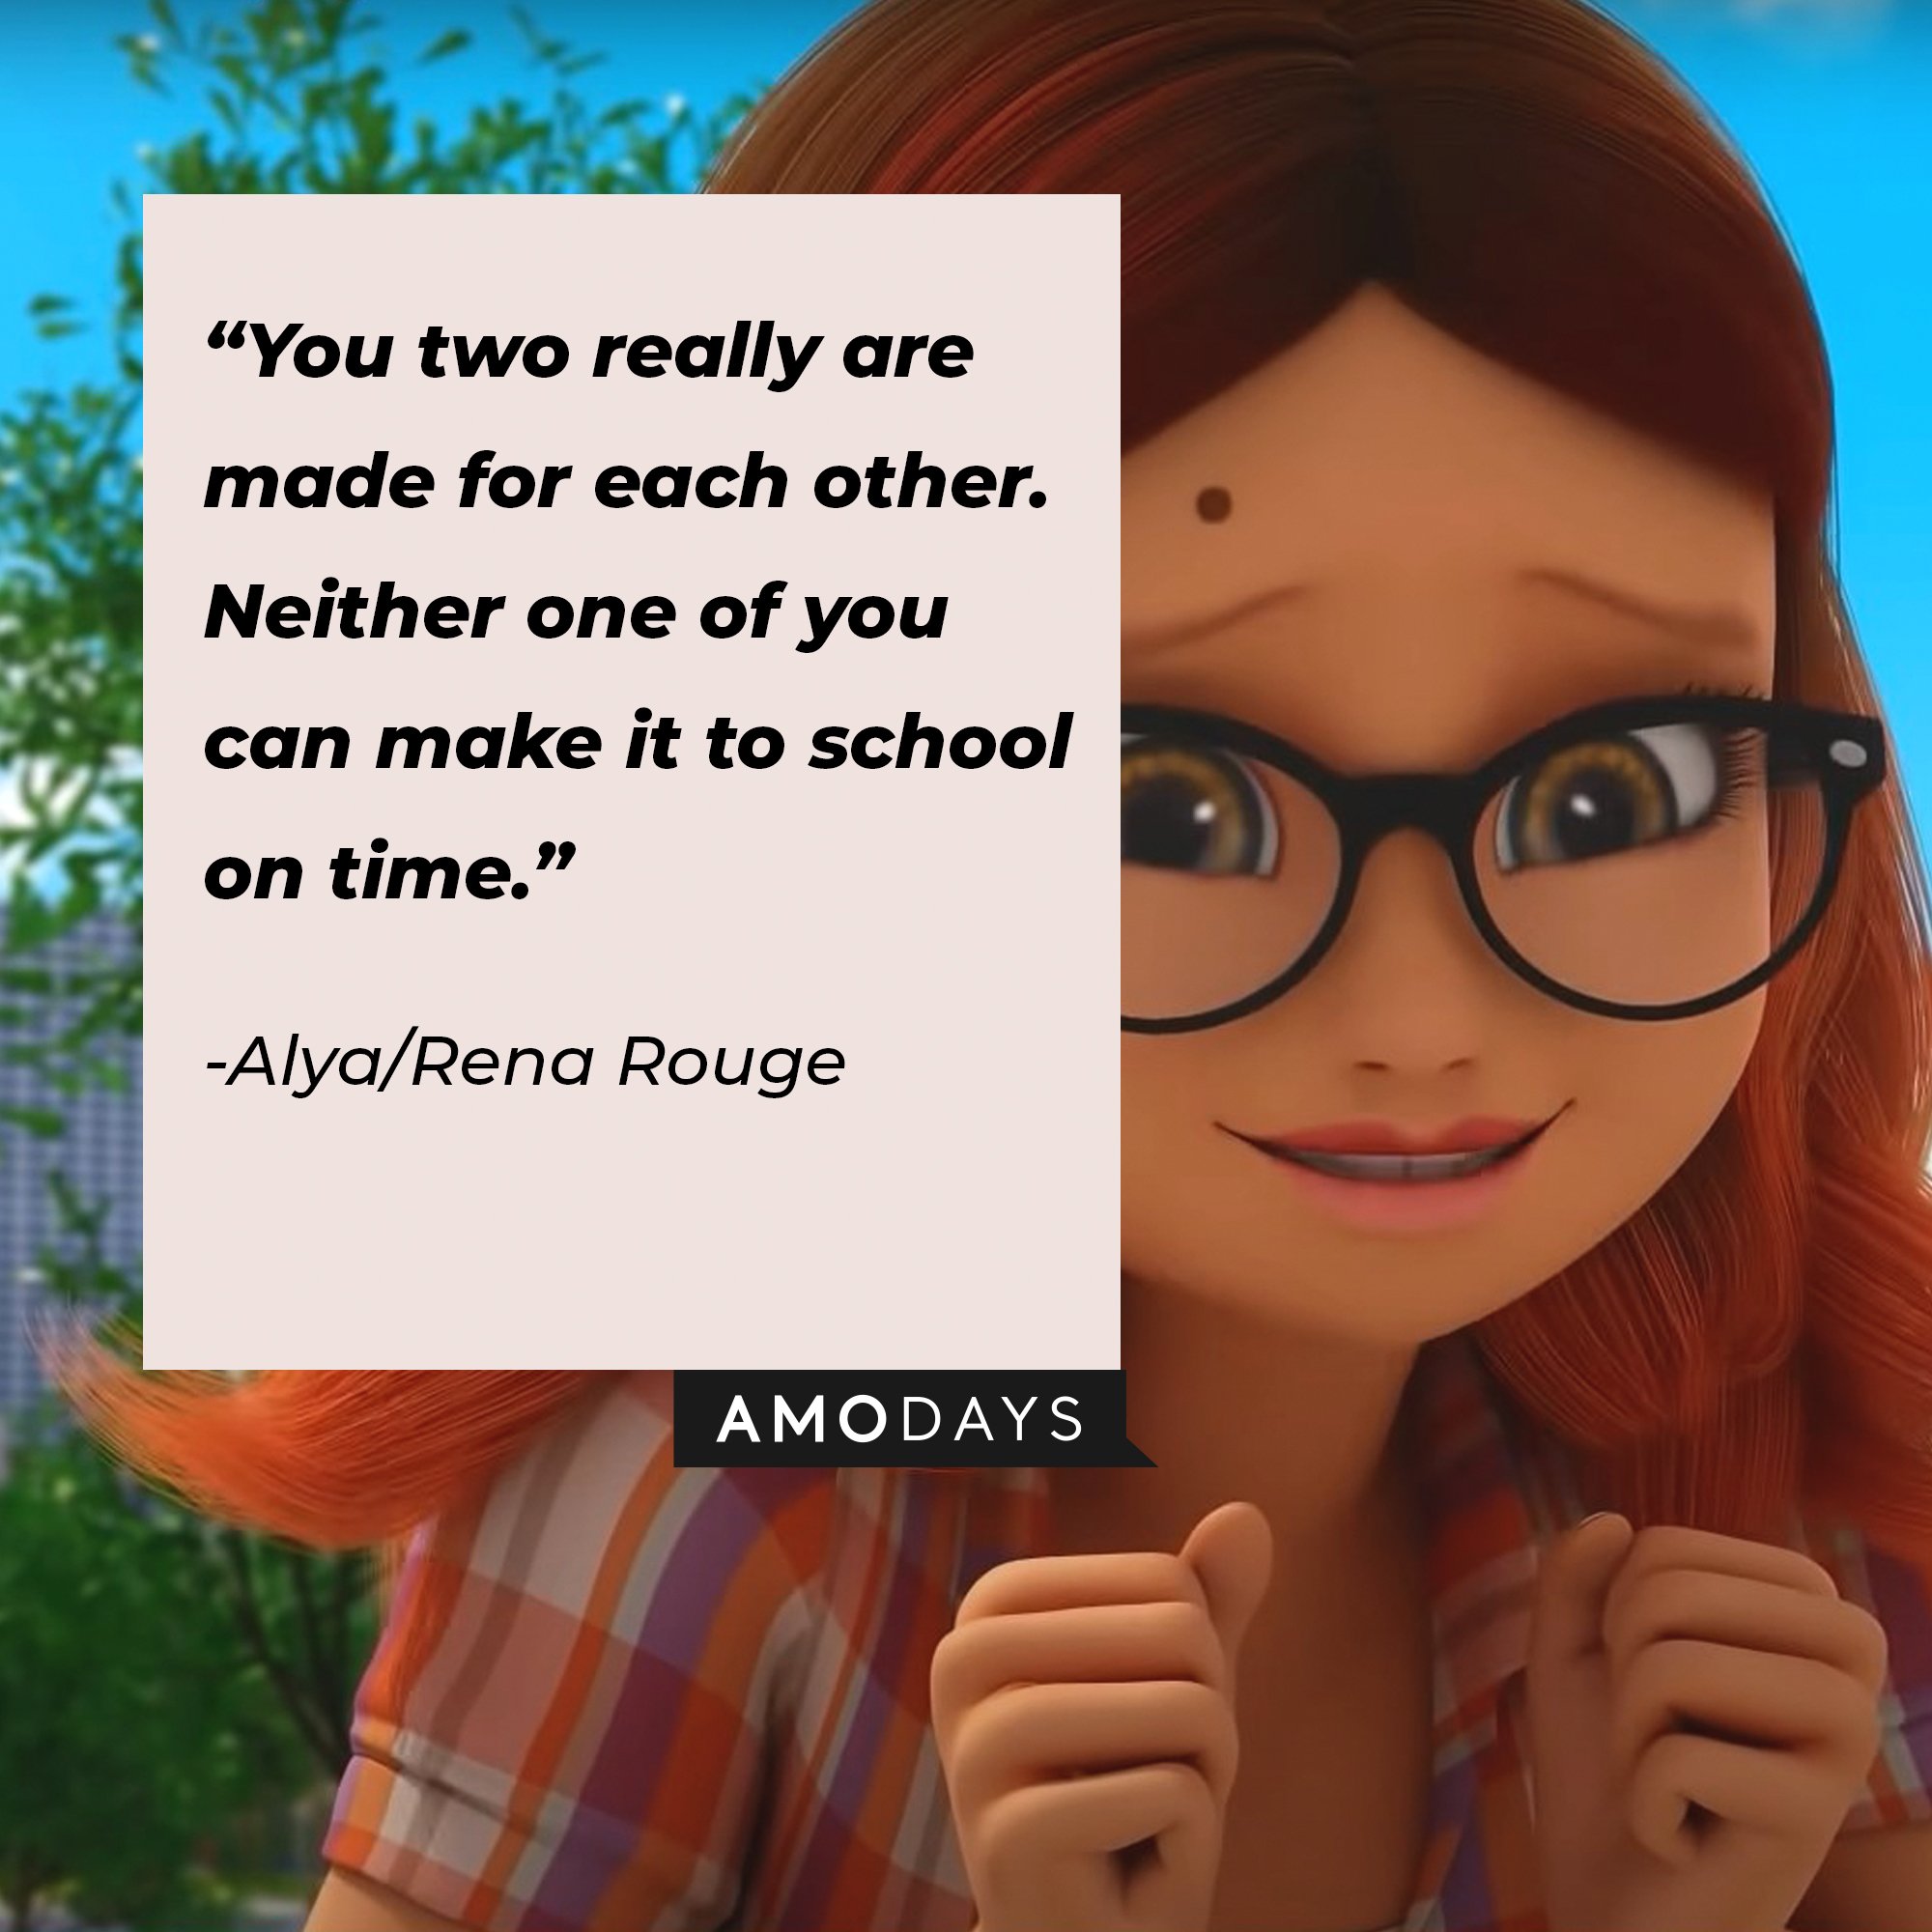 Alya// Rena Rouge’s quote: "You two really are made for each other. Neither one of you can make it to school on time."  | Image: AmoDays